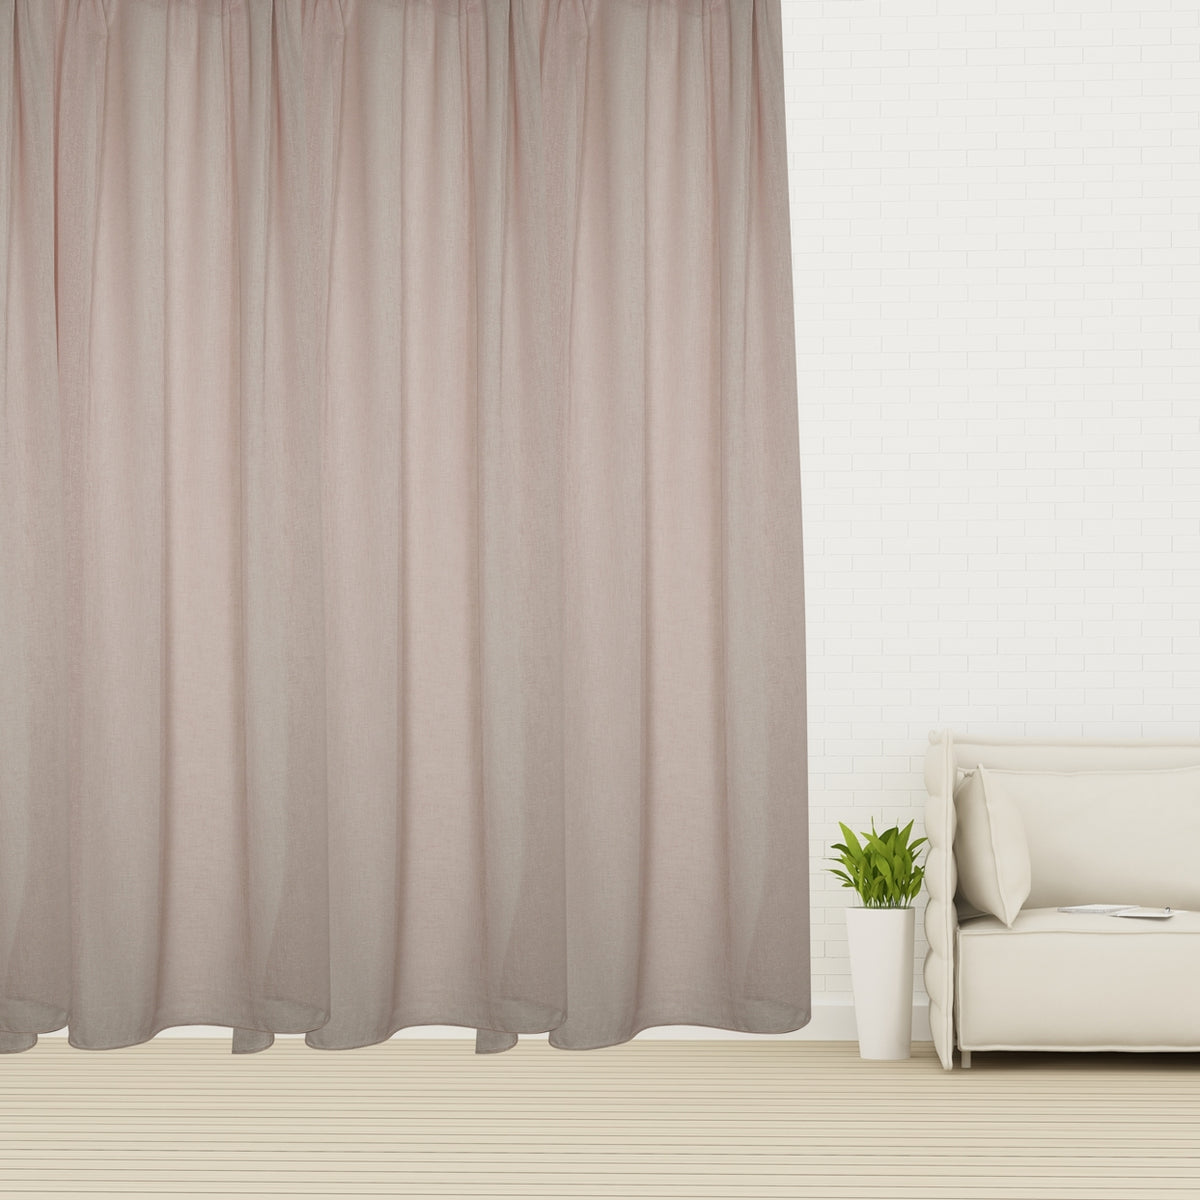 Day curtain pink Decade